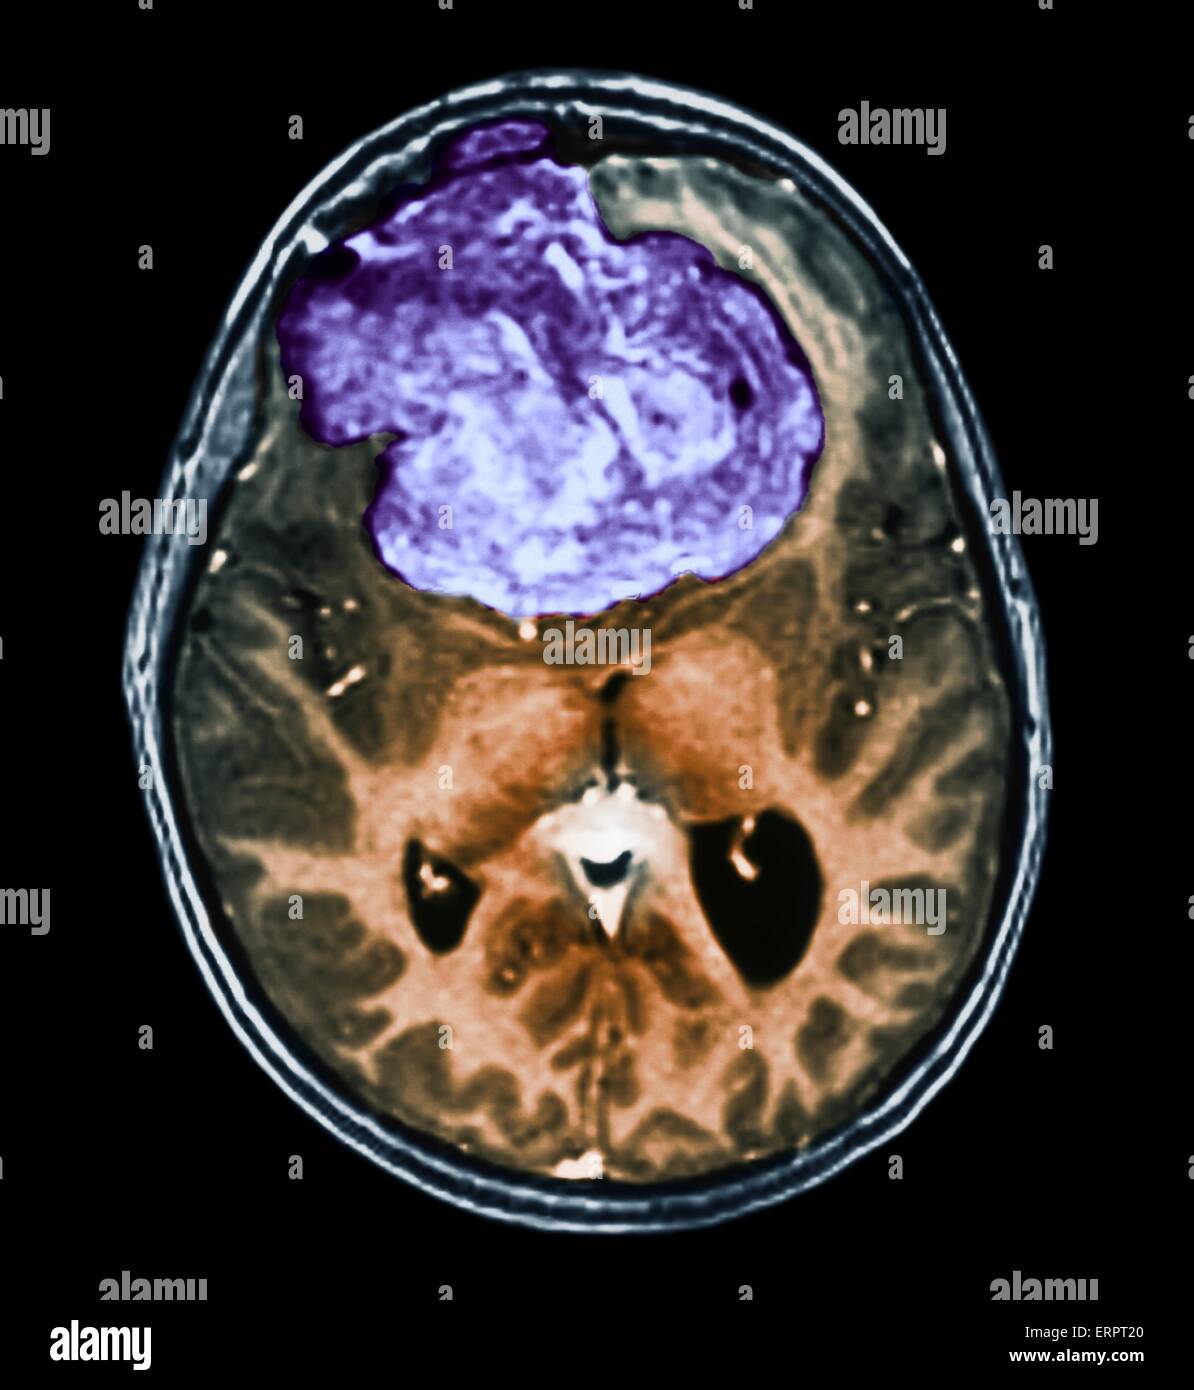 Benign brain tumour. Coloured computed tomography (CT) scan of the brain of a 25 year old patient with a meningioma (purple). This is a benign (non-cancerous) tumour that arises from the meninges, the membranes that surround the brain. It was caused by ra Stock Photo